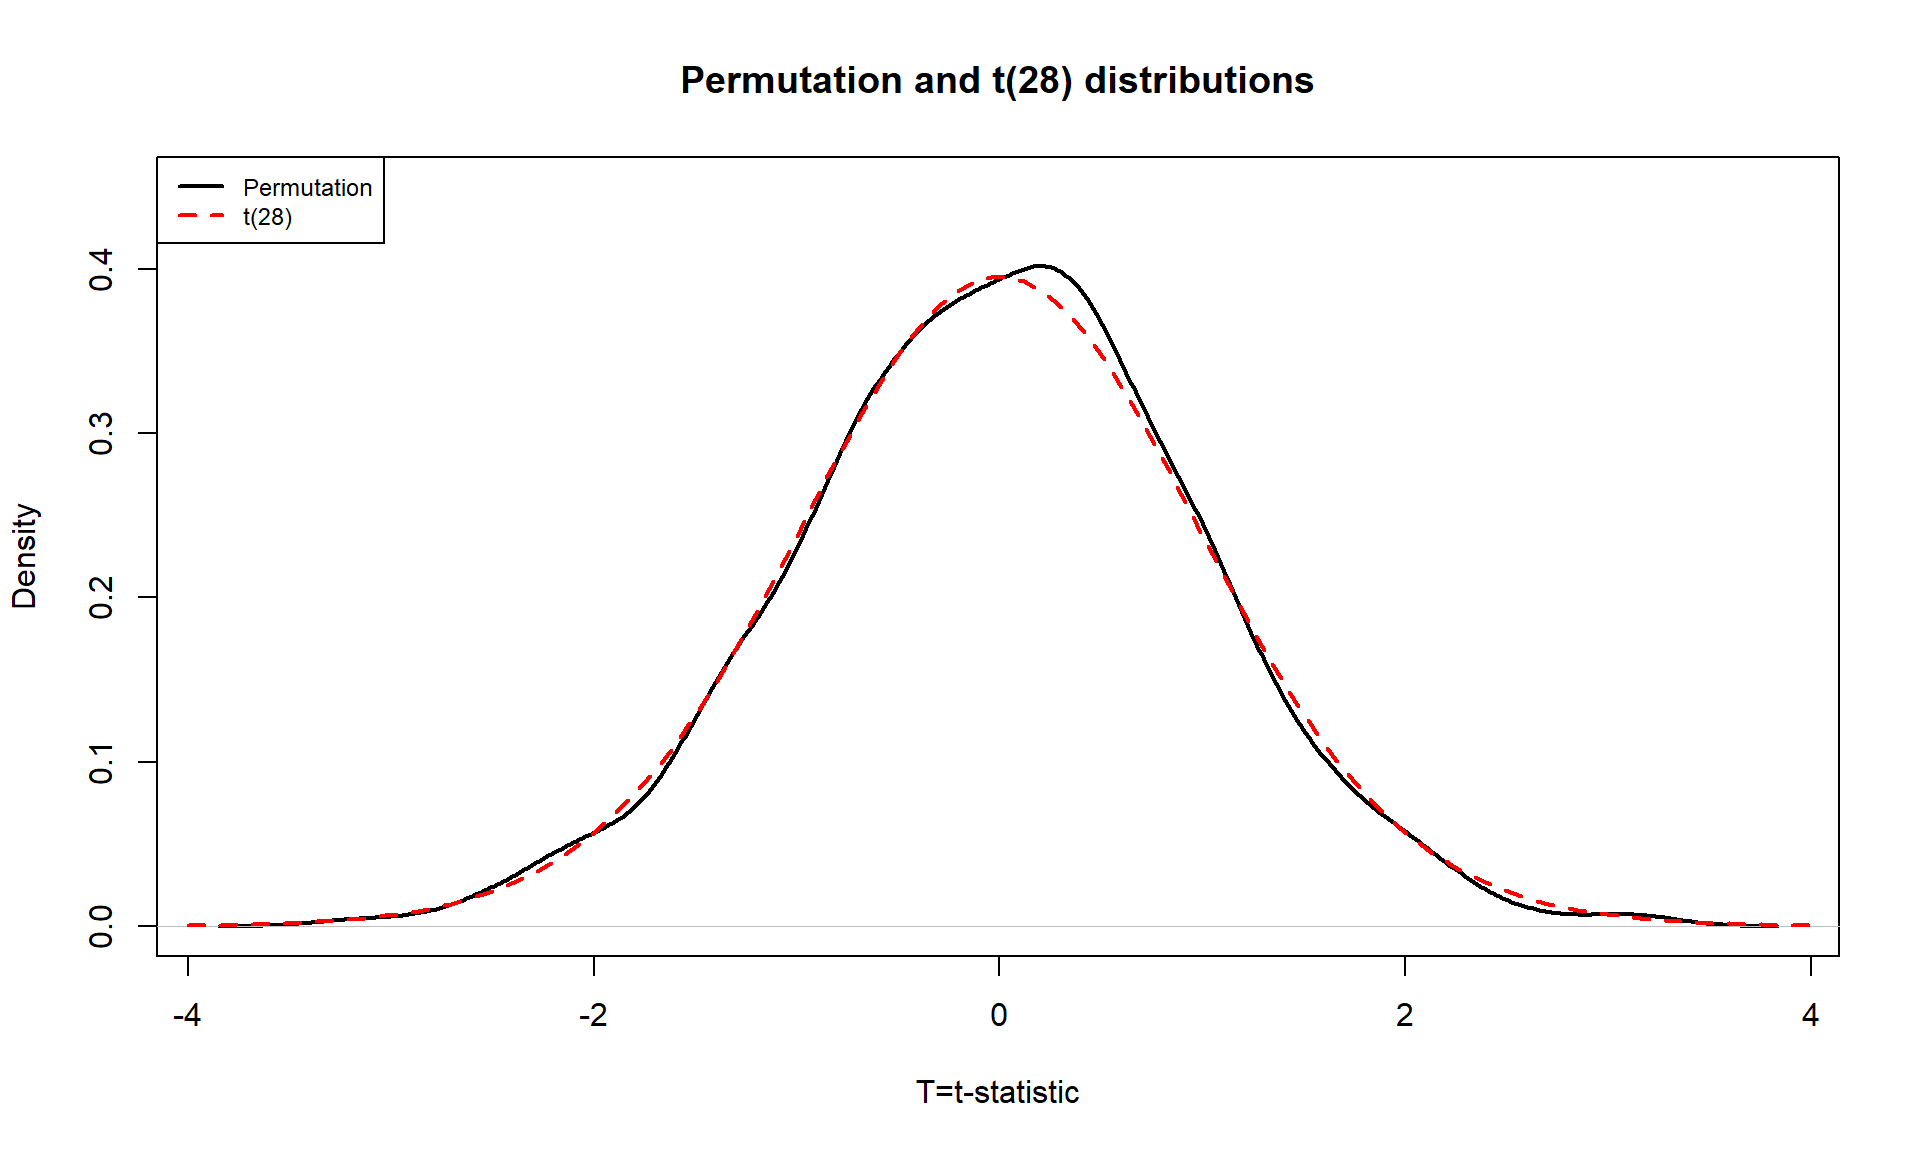 Plot of permutation and \(t\)-distribution with \(df = 28\). Note the close match in the two distributions, especially in the tails of the distributions where we are obtaining the p-values.